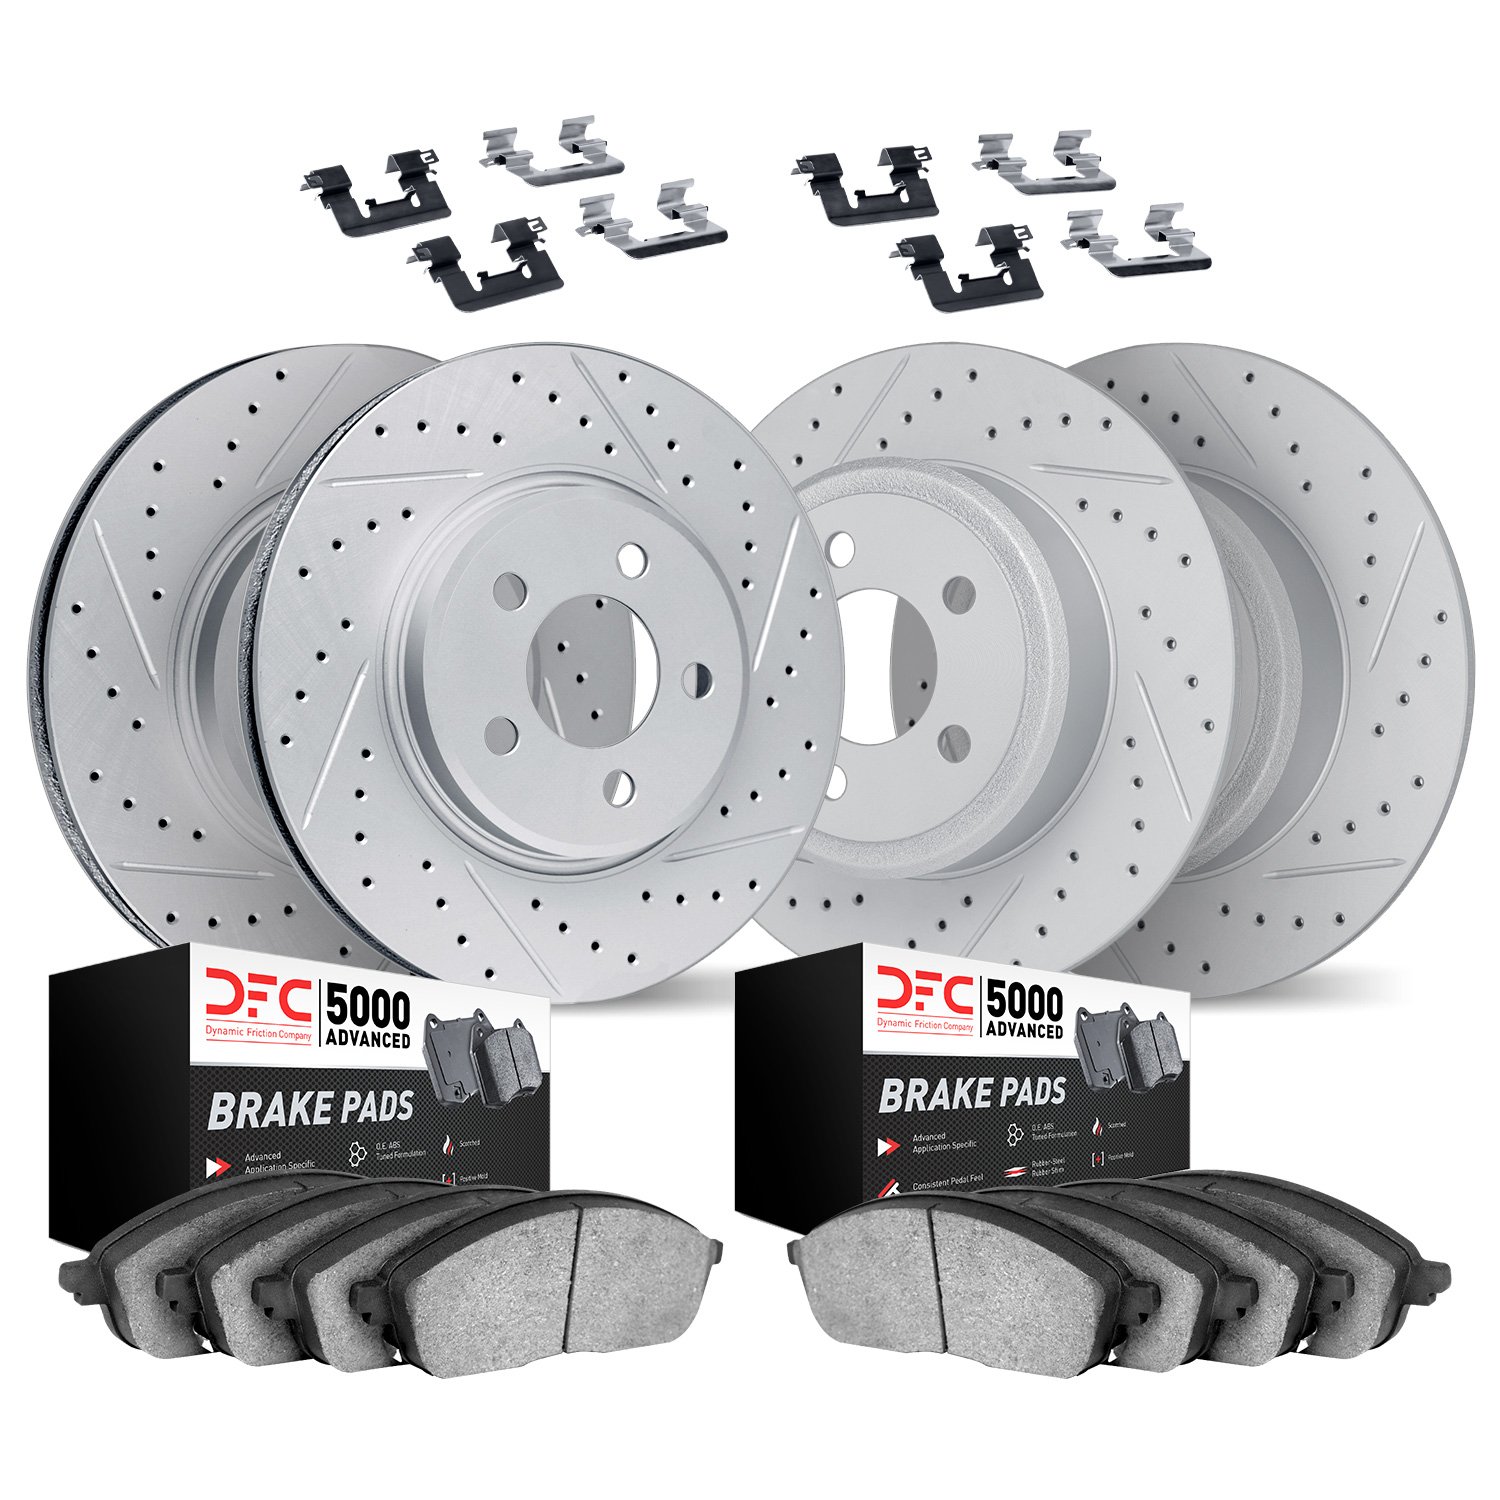 2514-45013 Geoperformance Drilled/Slotted Rotors w/5000 Advanced Brake Pads Kit & Hardware, 2011-2016 GM, Position: Front and Re